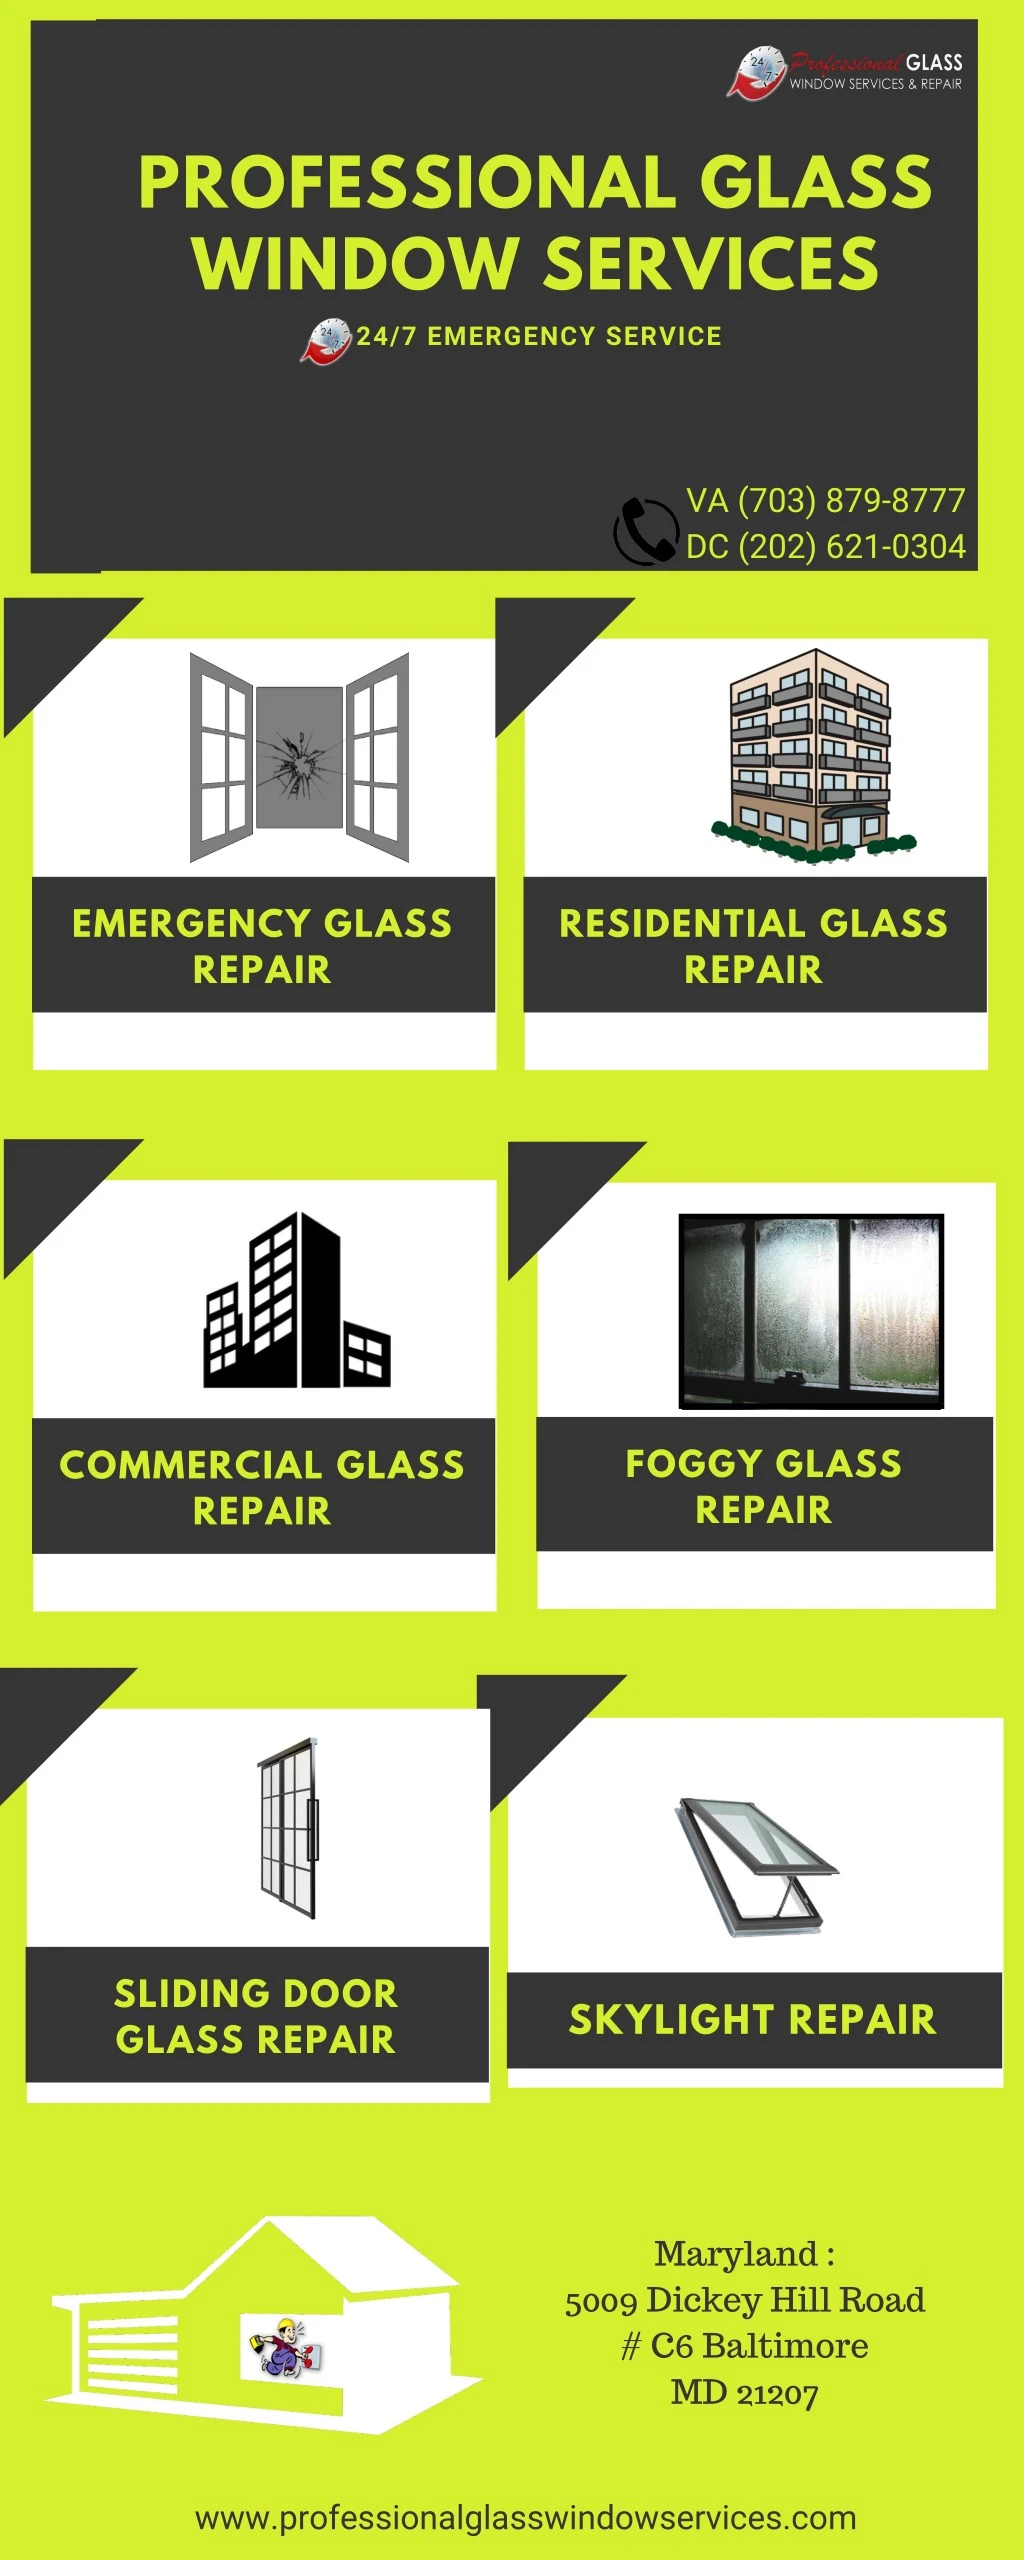 professional glass window services